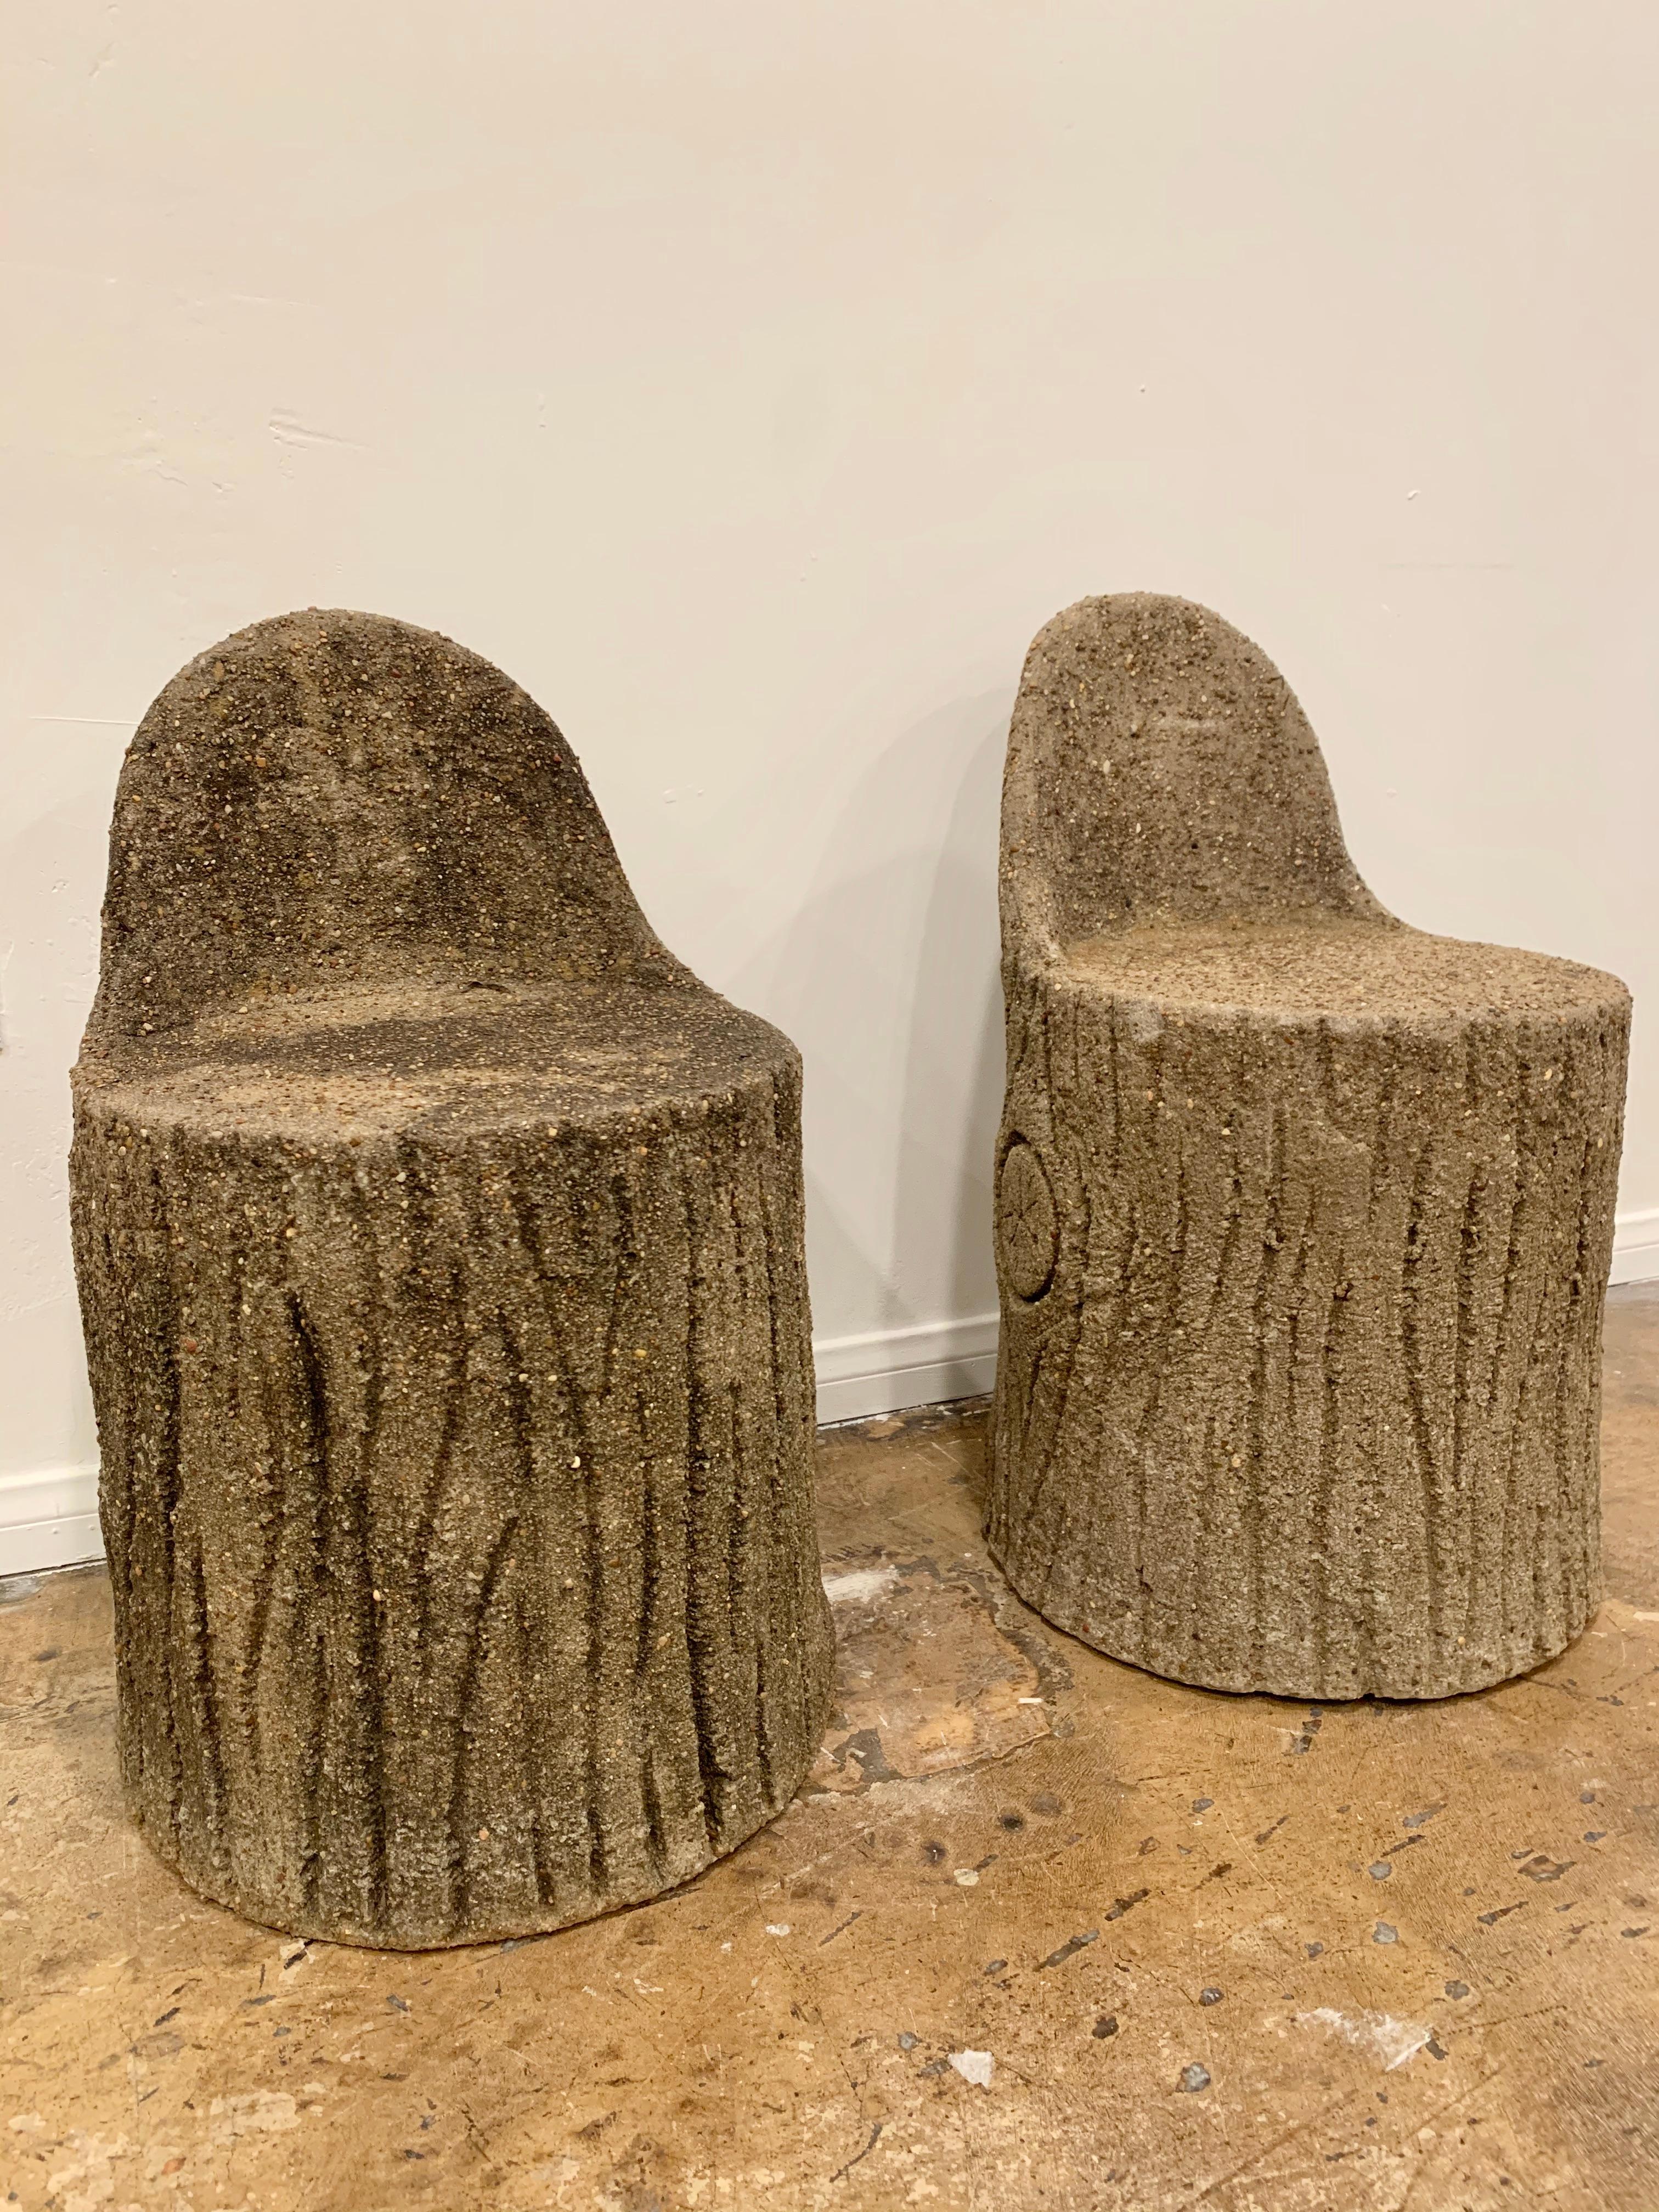 Unusual pair of faux bois chairs made of concrete aggregate. Chairs in the form a tree trunk and bark. Great scale and presence. Slightly different patinas to each chair. Great condition. Two available. Priced individually.